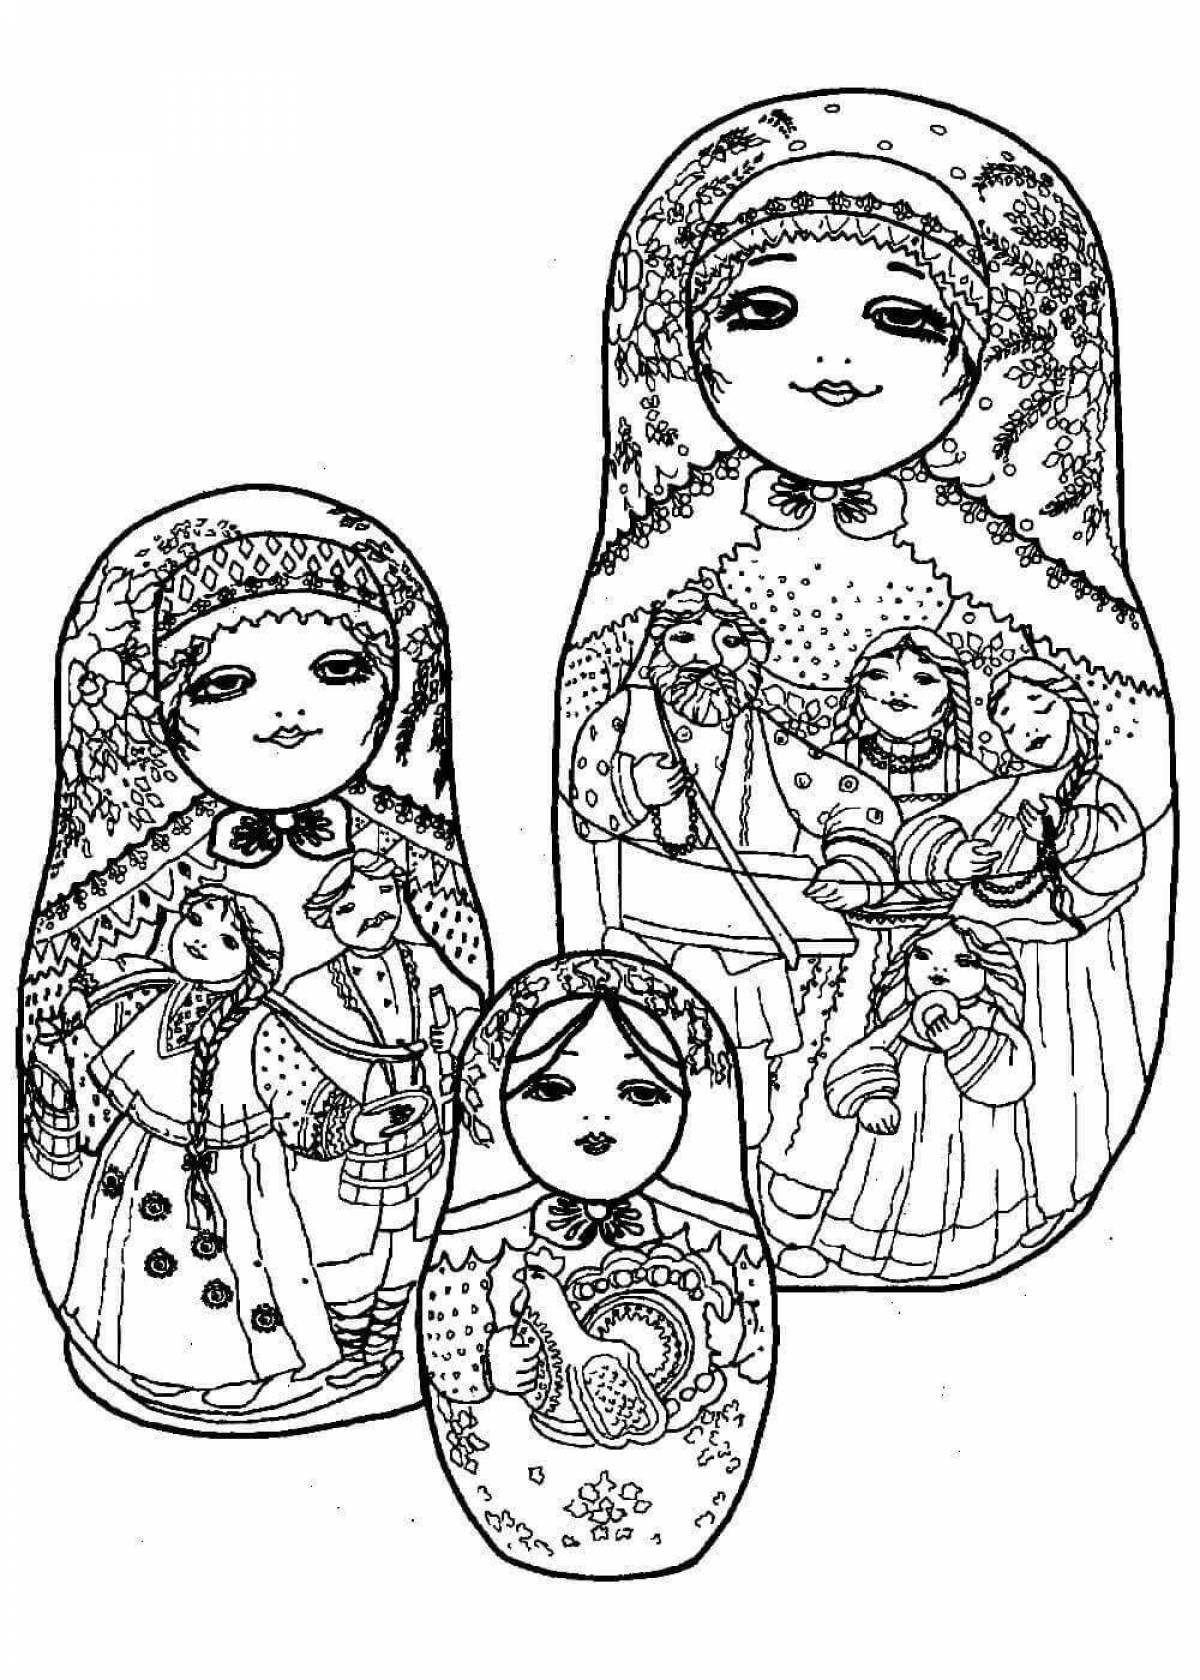 Colorful matryoshka by numbers coloring